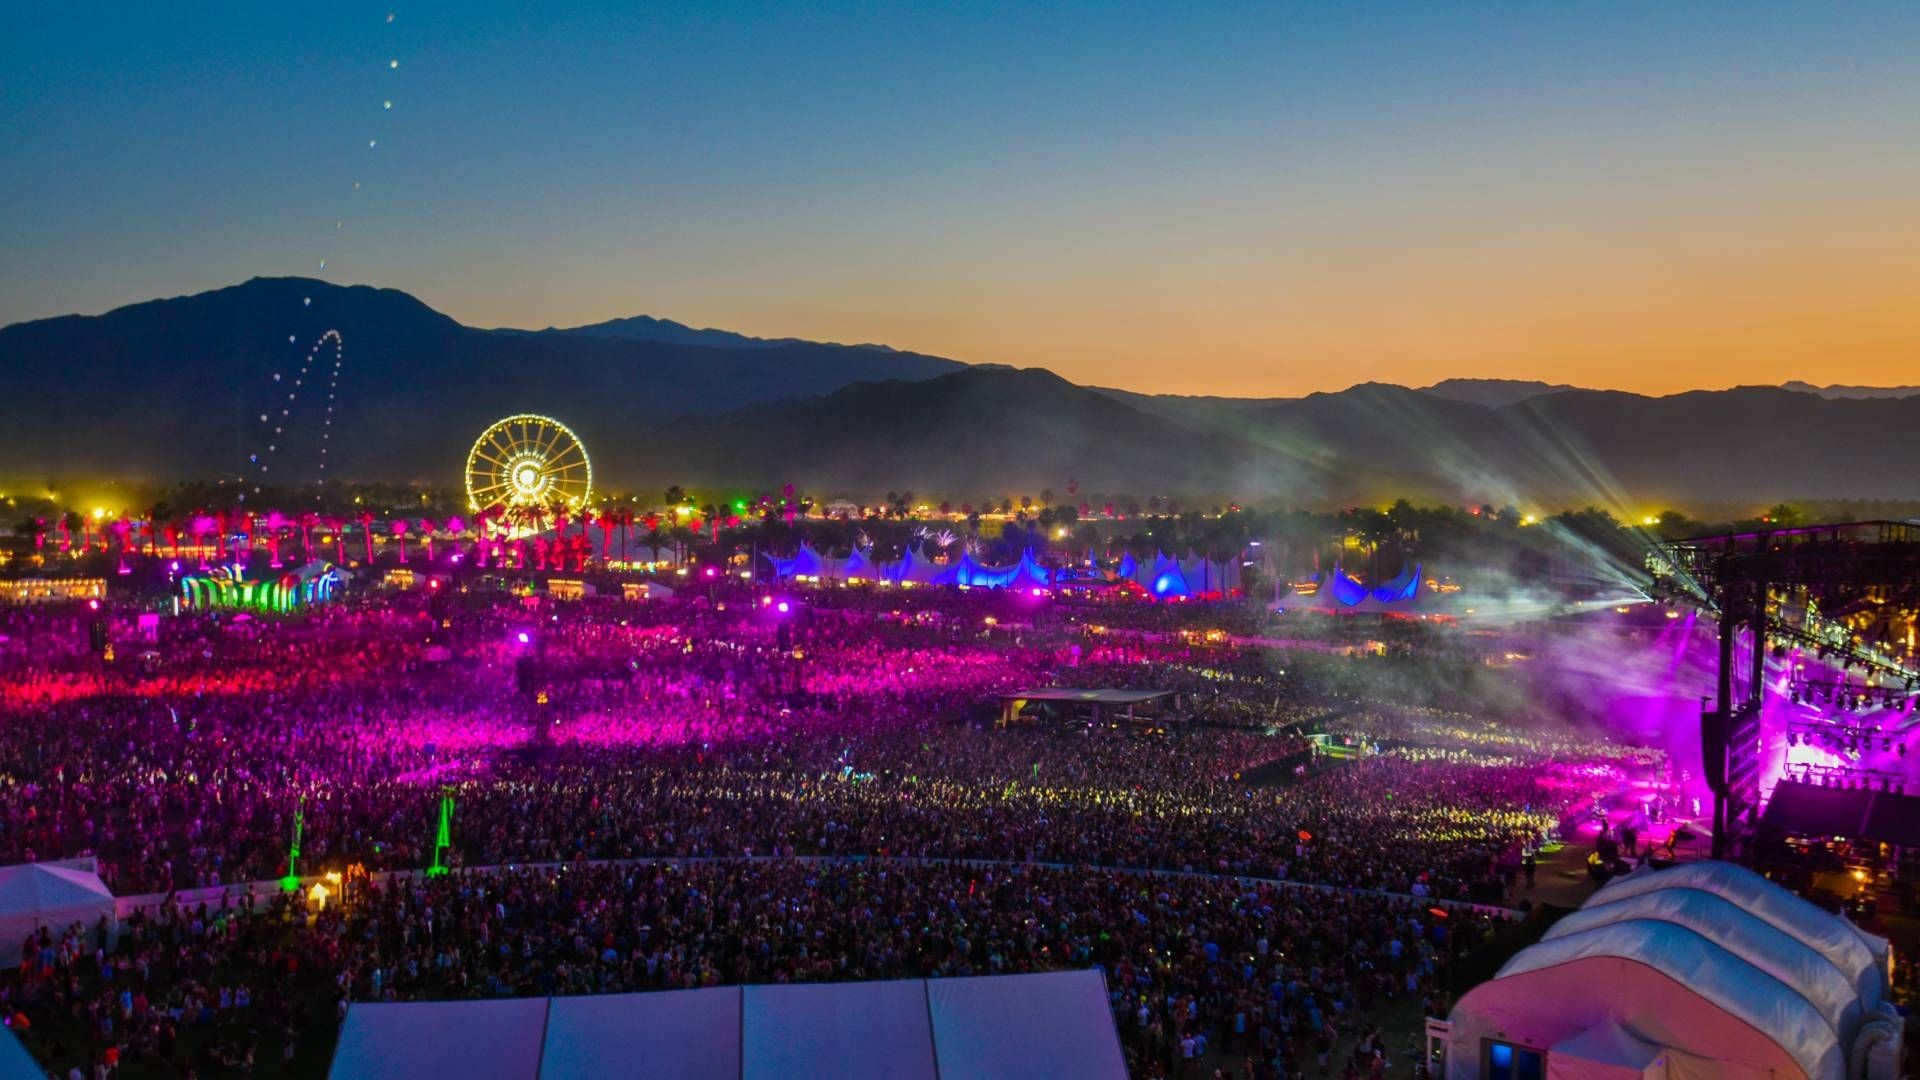 Coachella 2019 Desktop Backgrounds HD with high-resolution 1920x1080 pixel. You can use this wallpaper for your Windows and Mac OS computers as well as your Android and iPhone smartphones